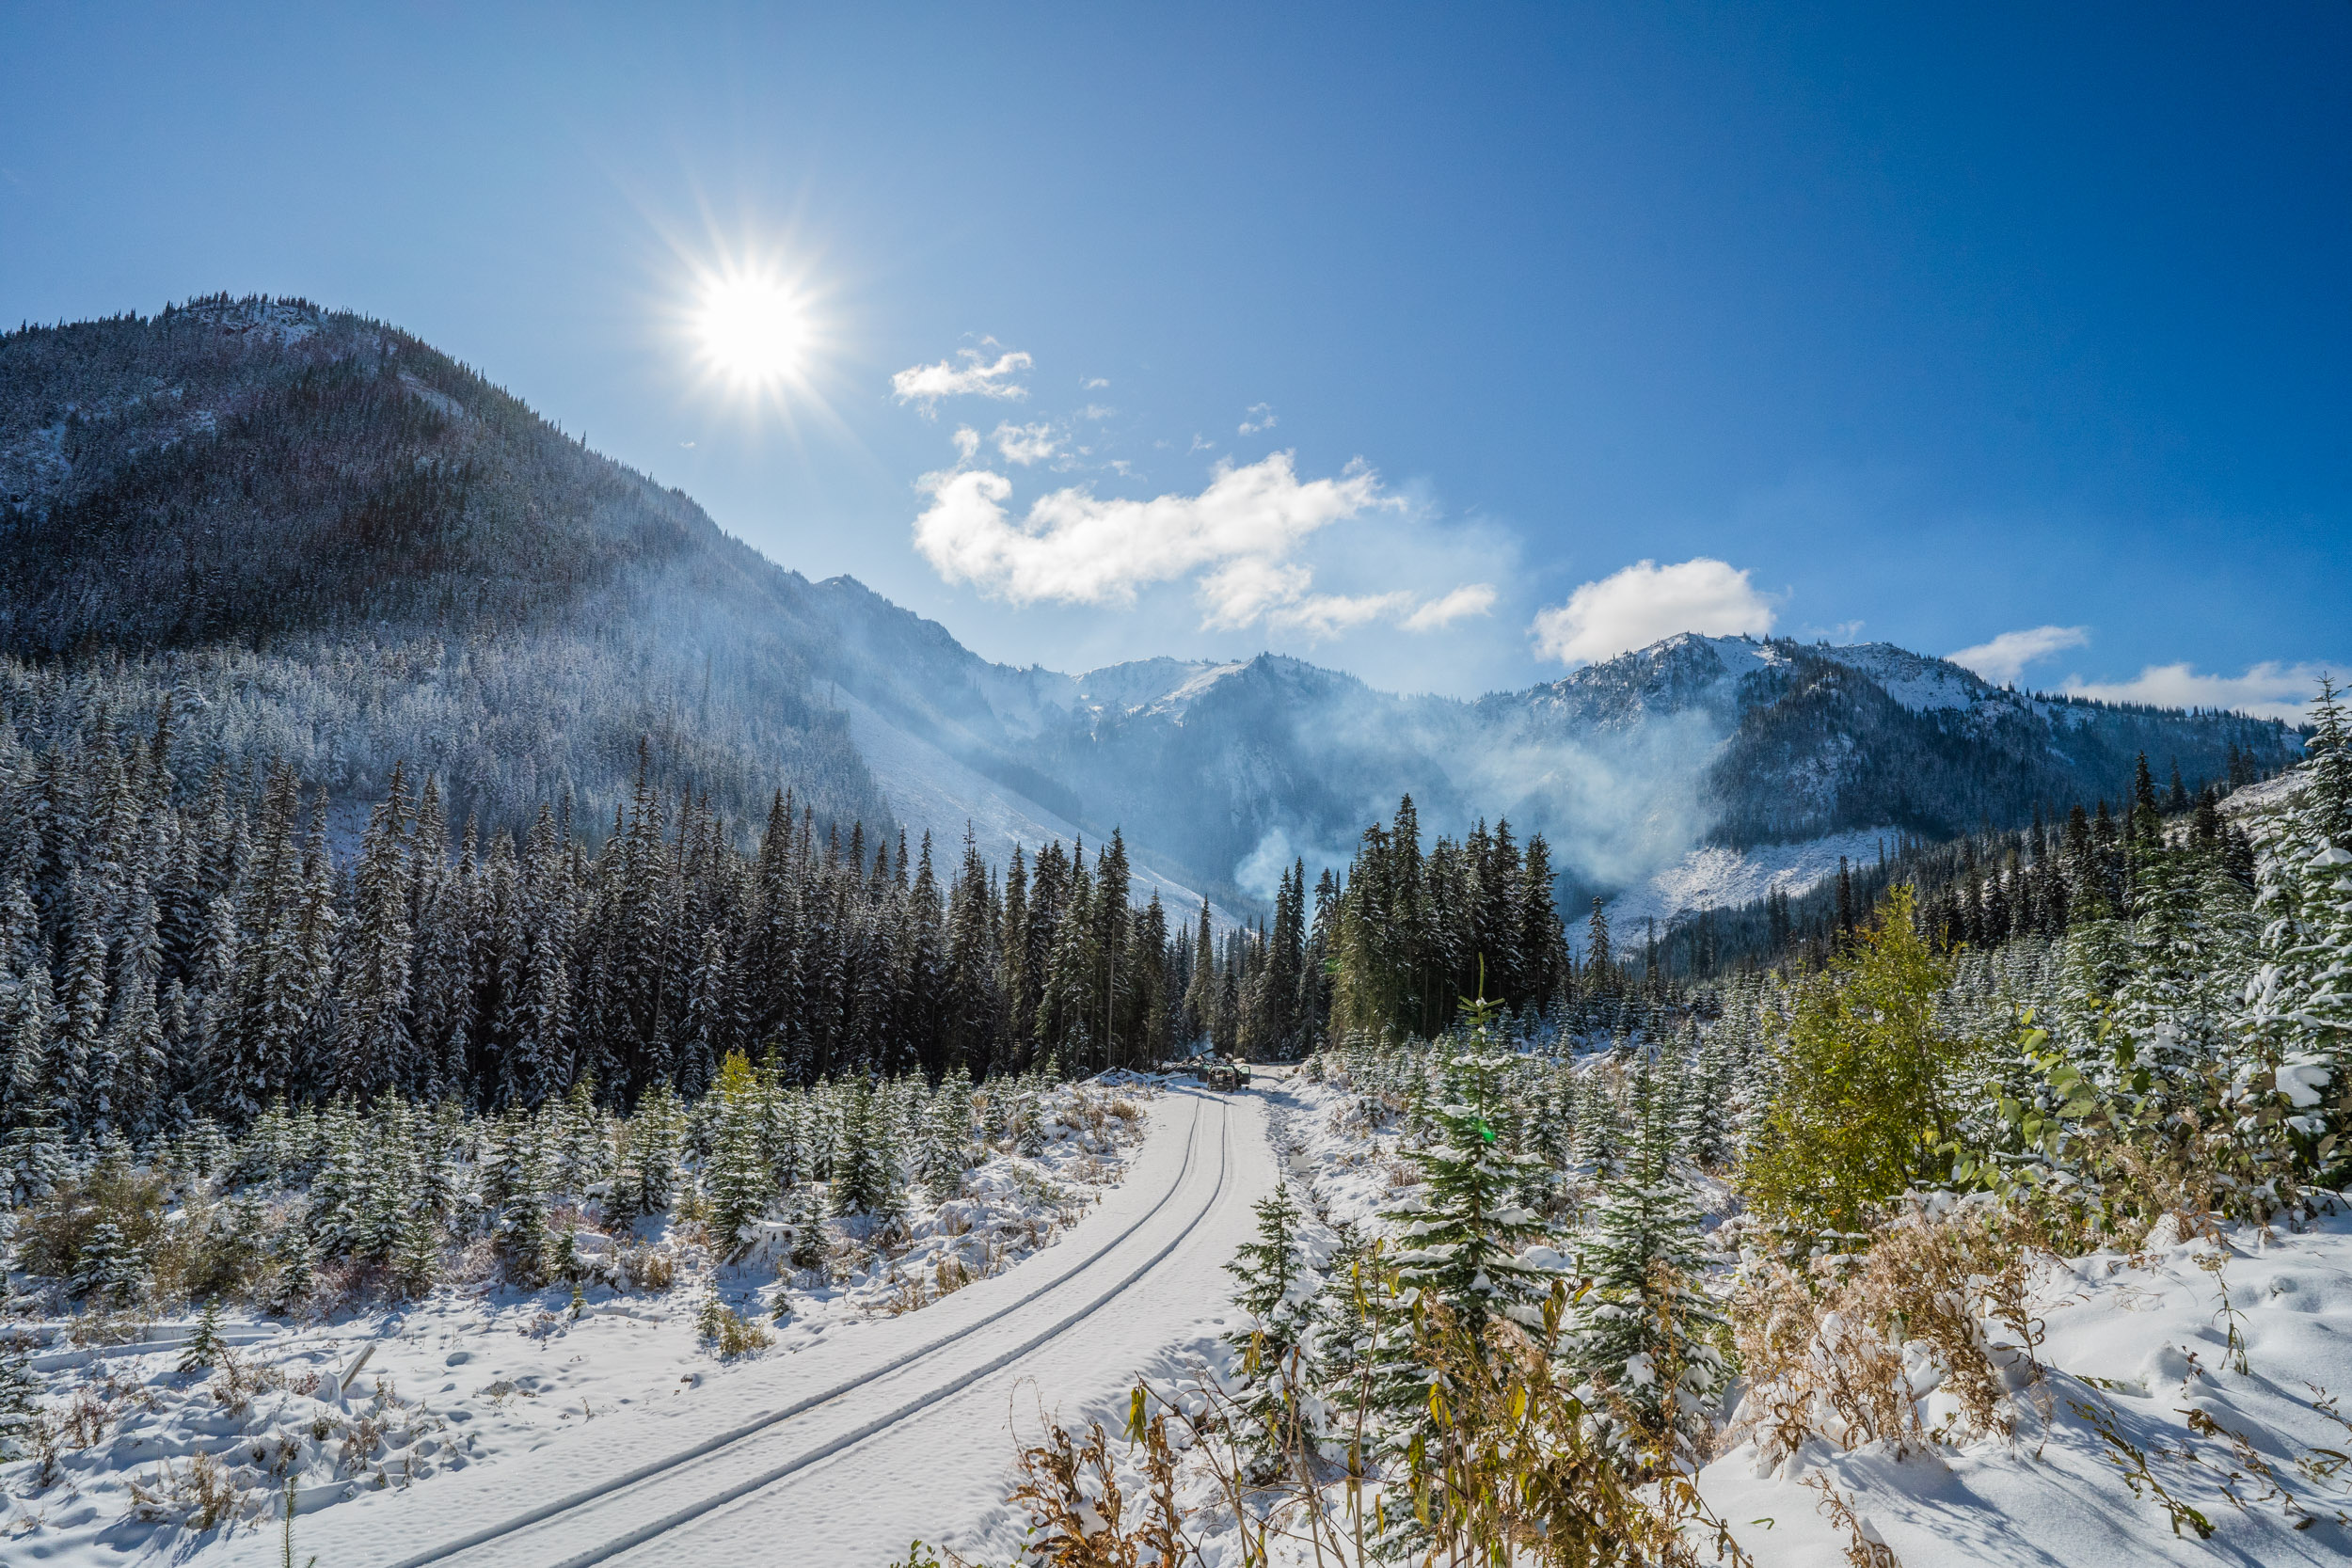 A snowy road leads into the forest with the Silverdaisy mountain peaks in the background